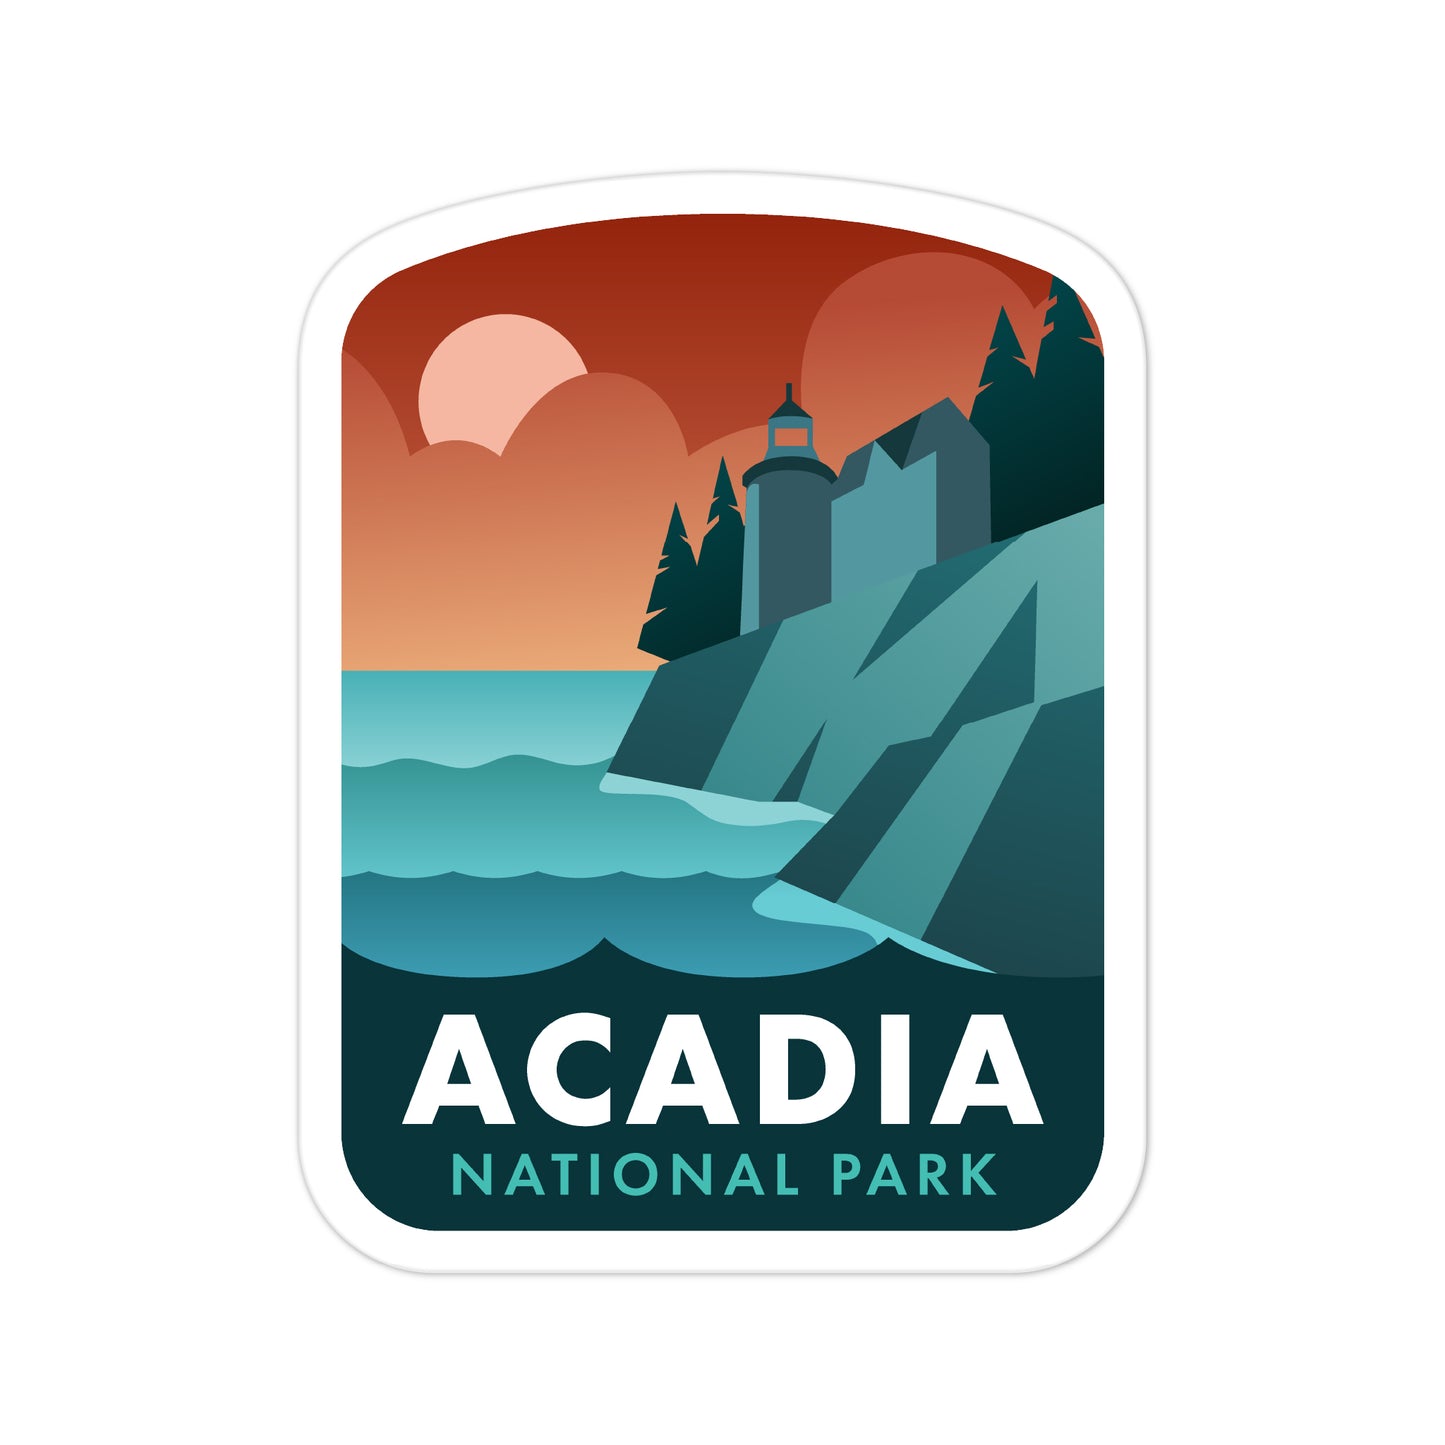 A sticker of Acadia National Park